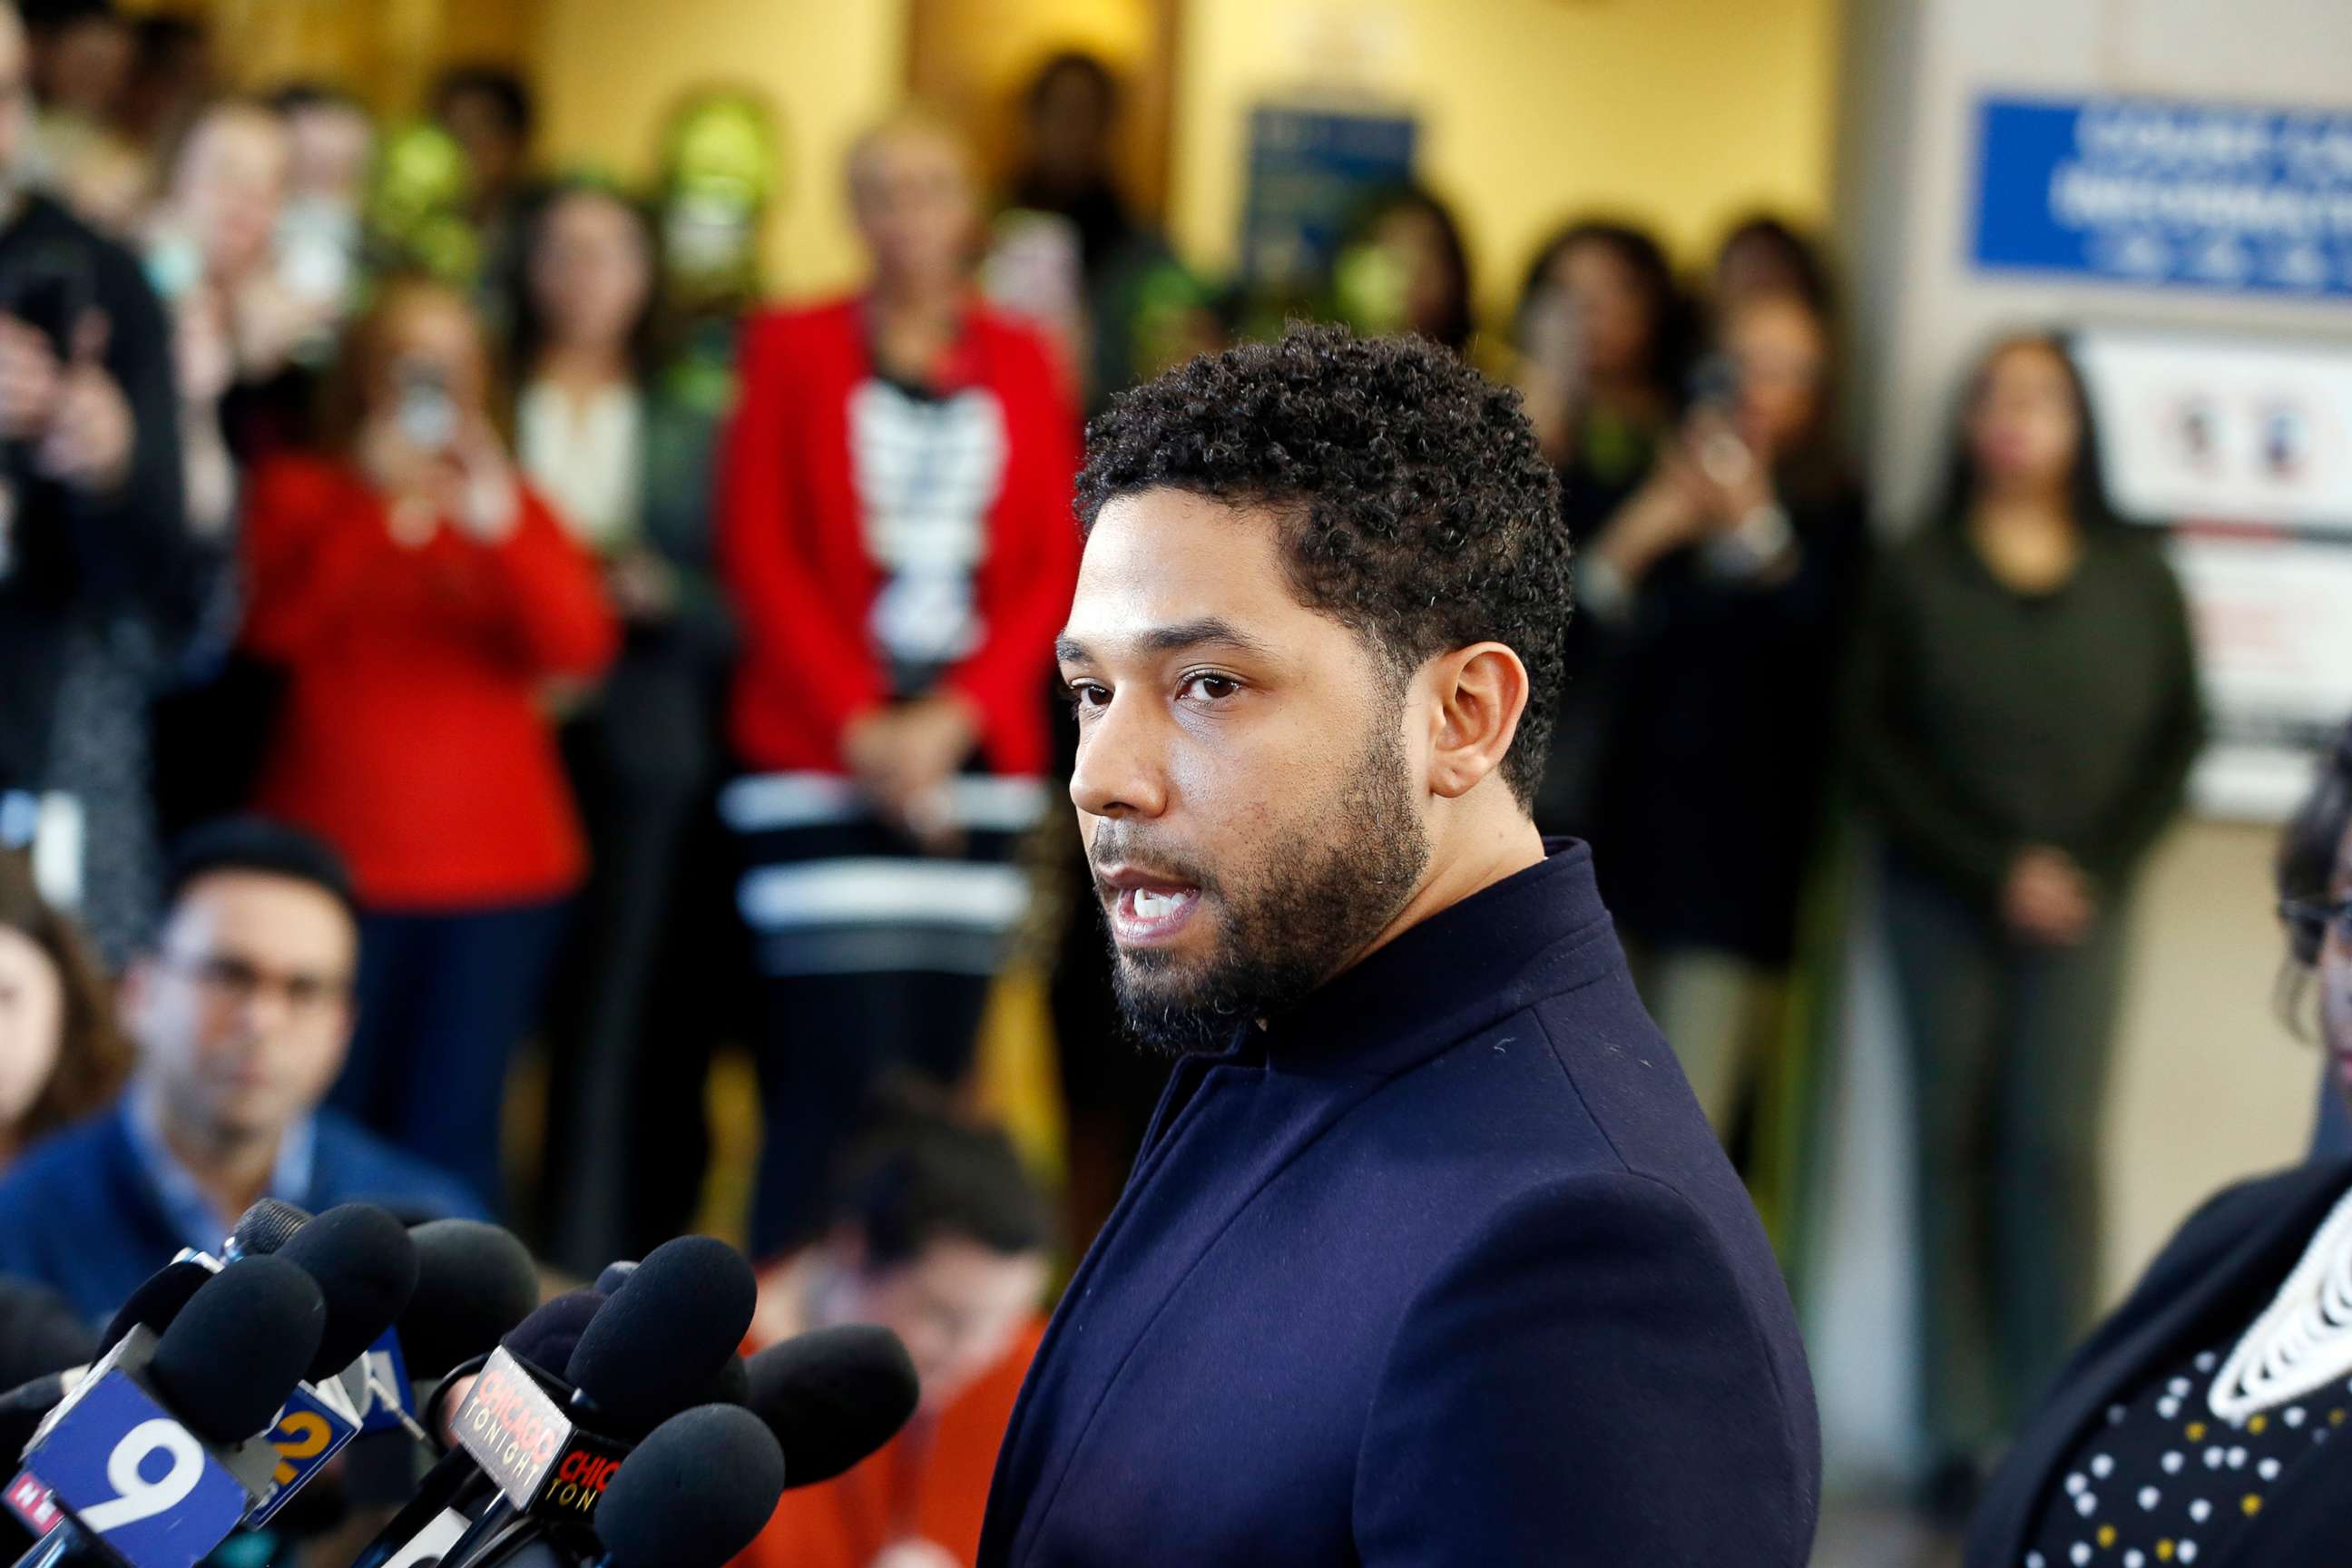 PHOTO: Jussie Smollett speaks with members of the media after his court appearance at Leighton Courthouse, March 26, 2019, in Chicago.